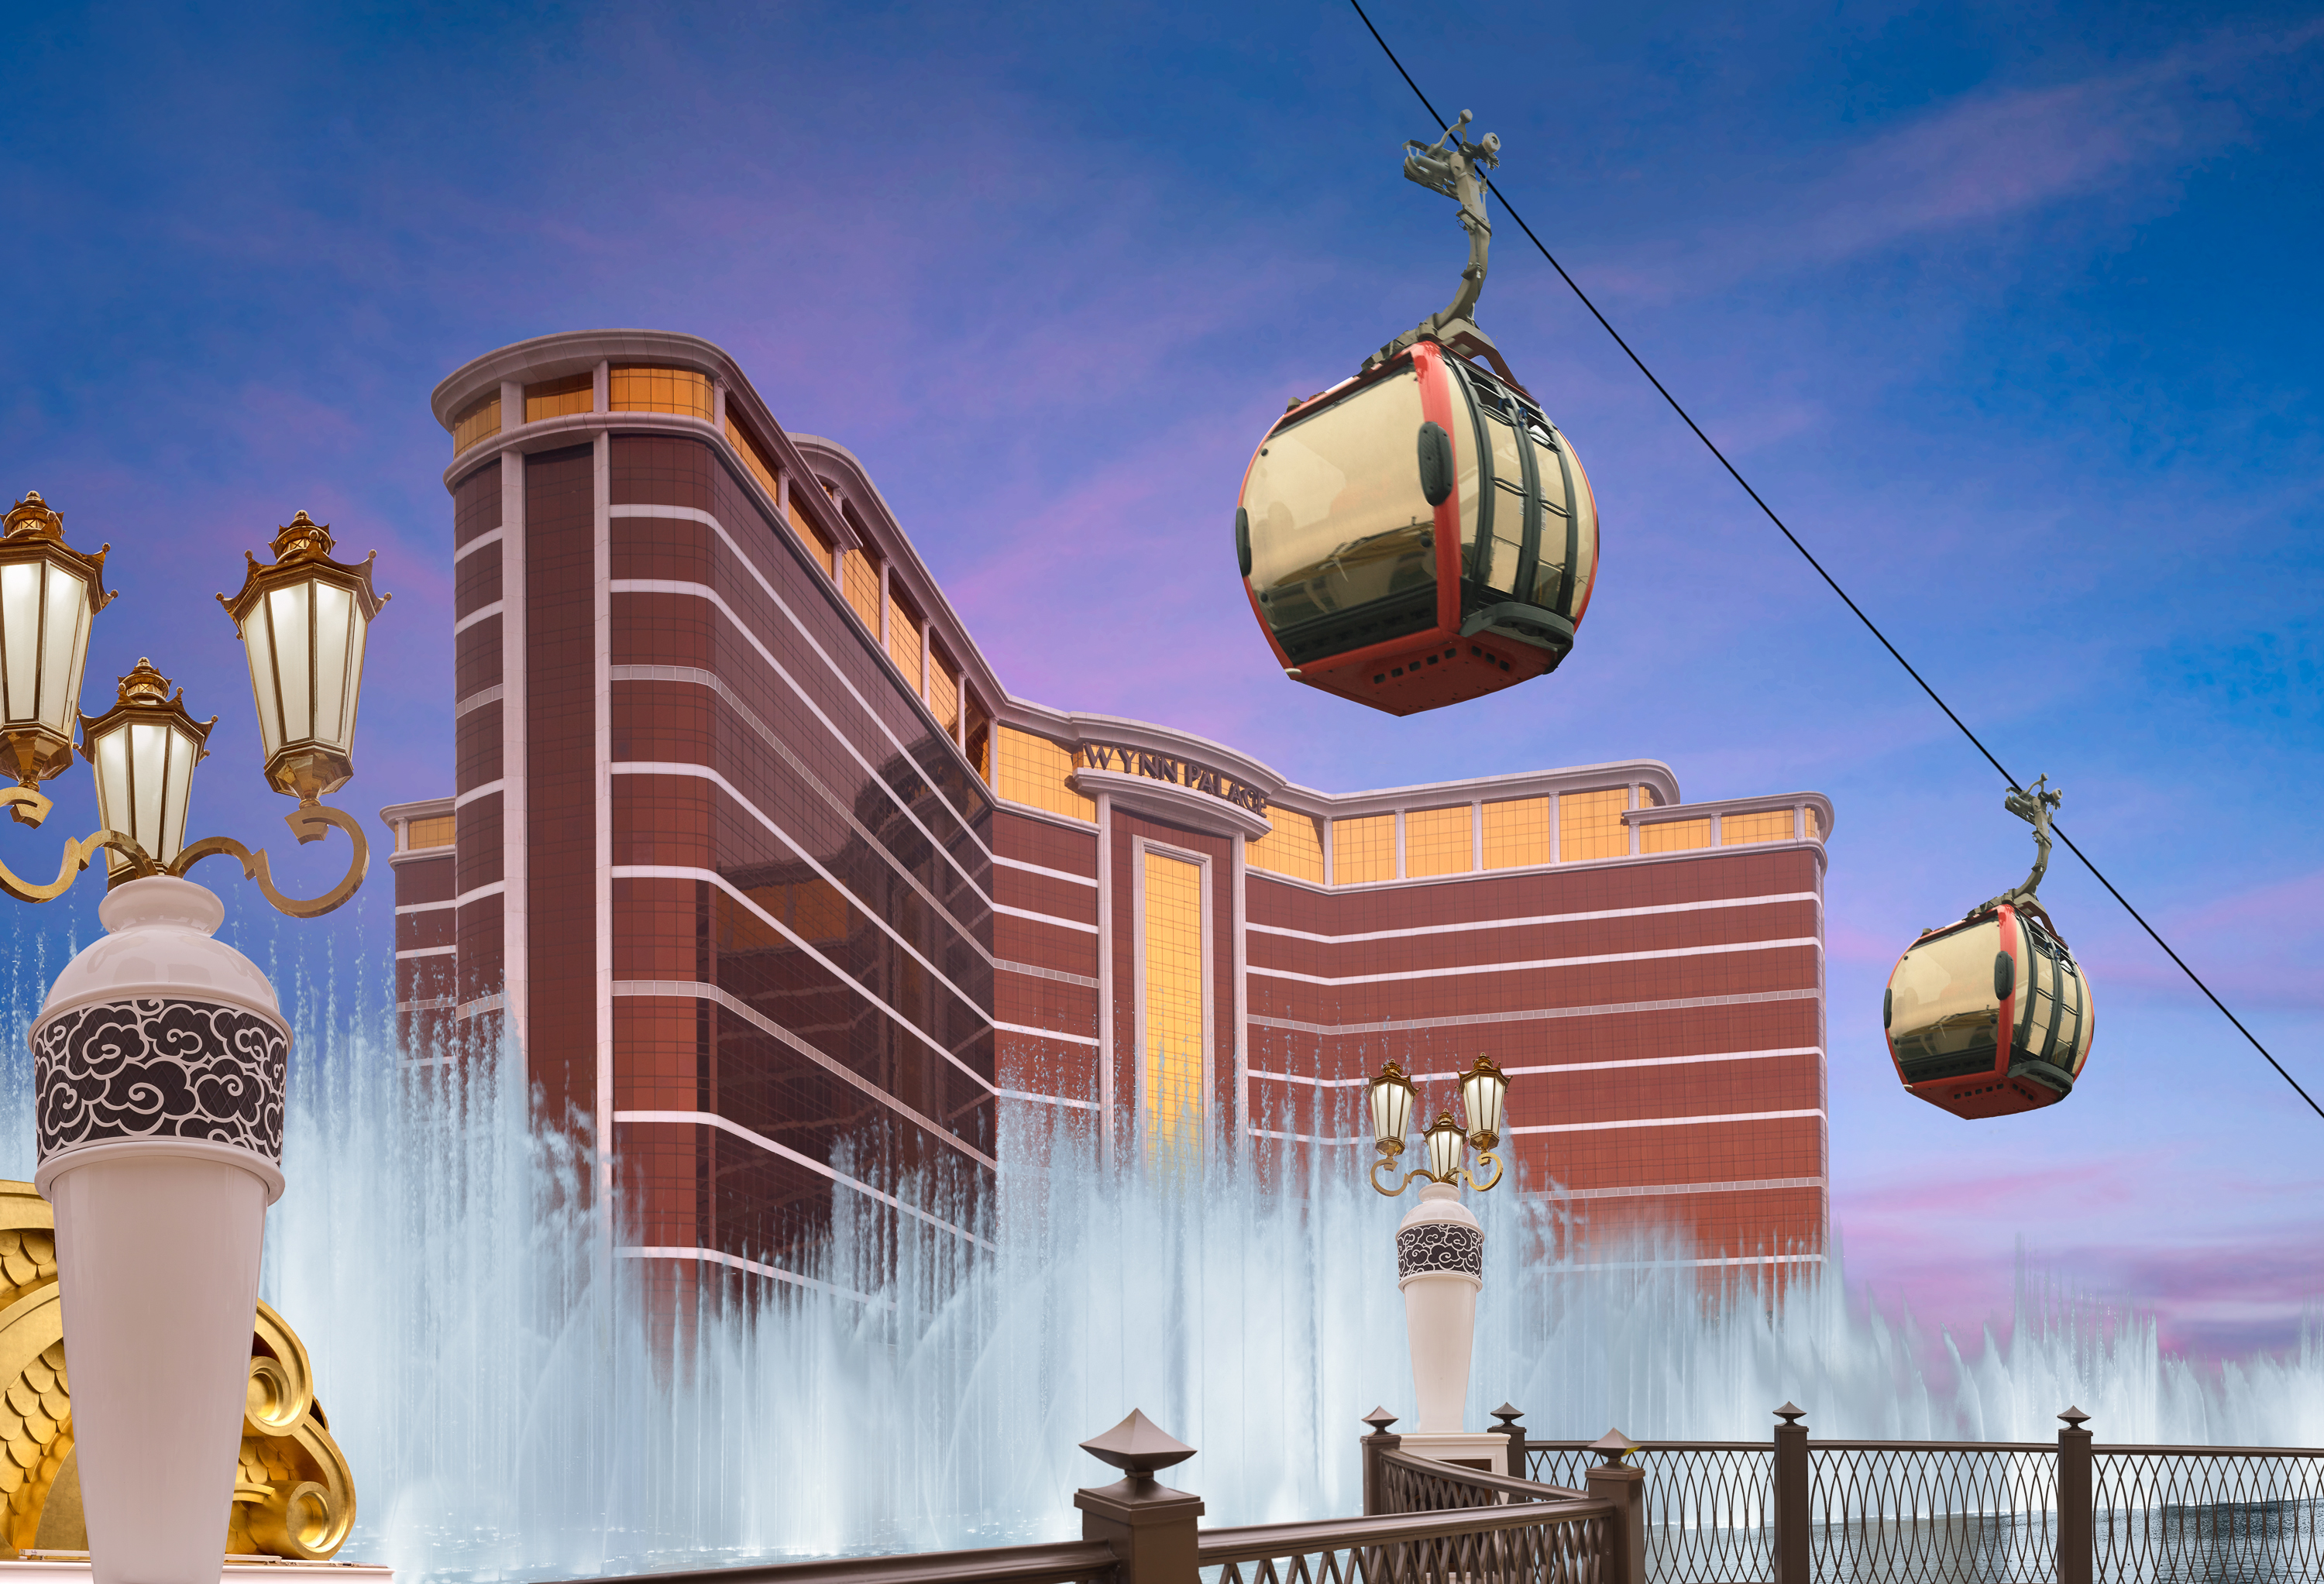 Stay in the lap of luxury at Wynn Palace Cotai.